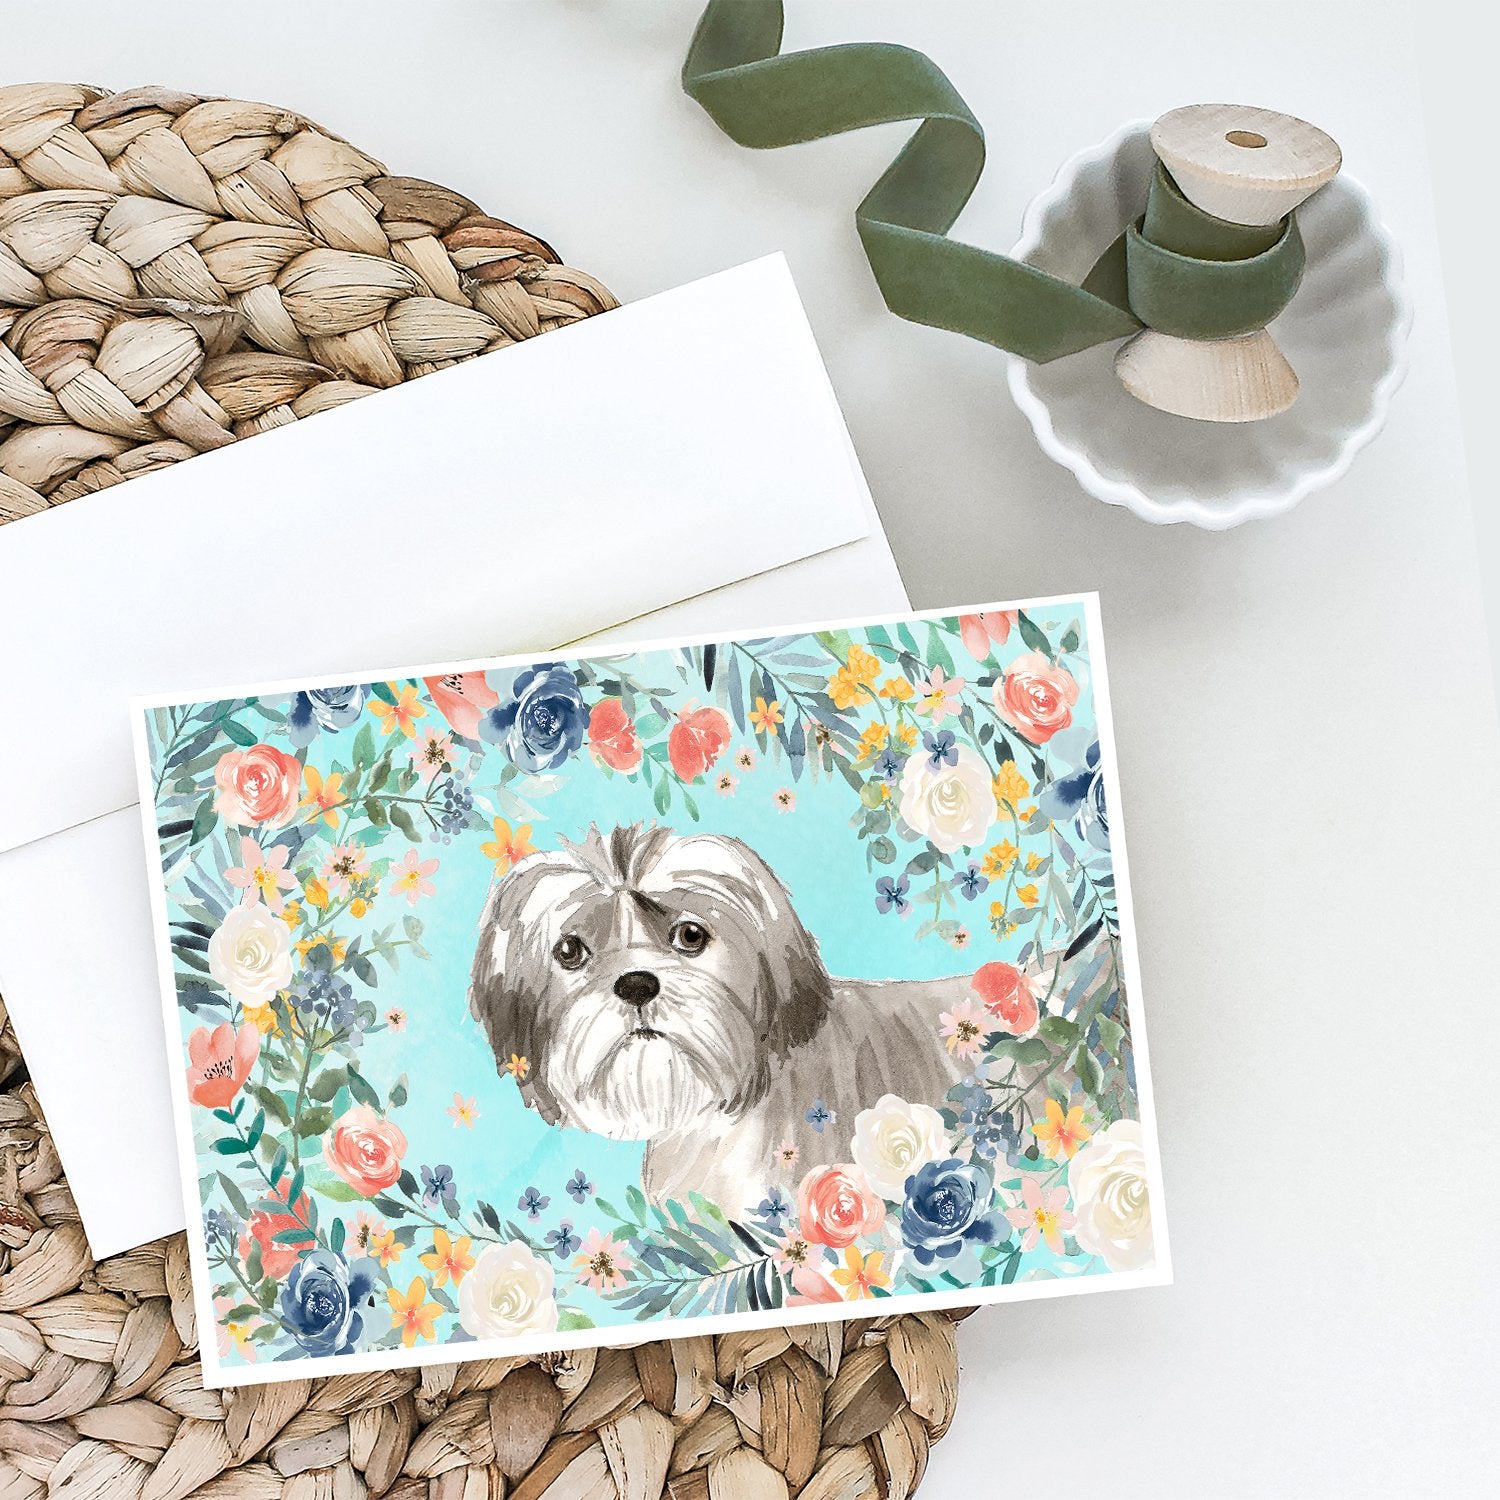 Buy this Shih Tzu Puppy Greeting Cards and Envelopes Pack of 8